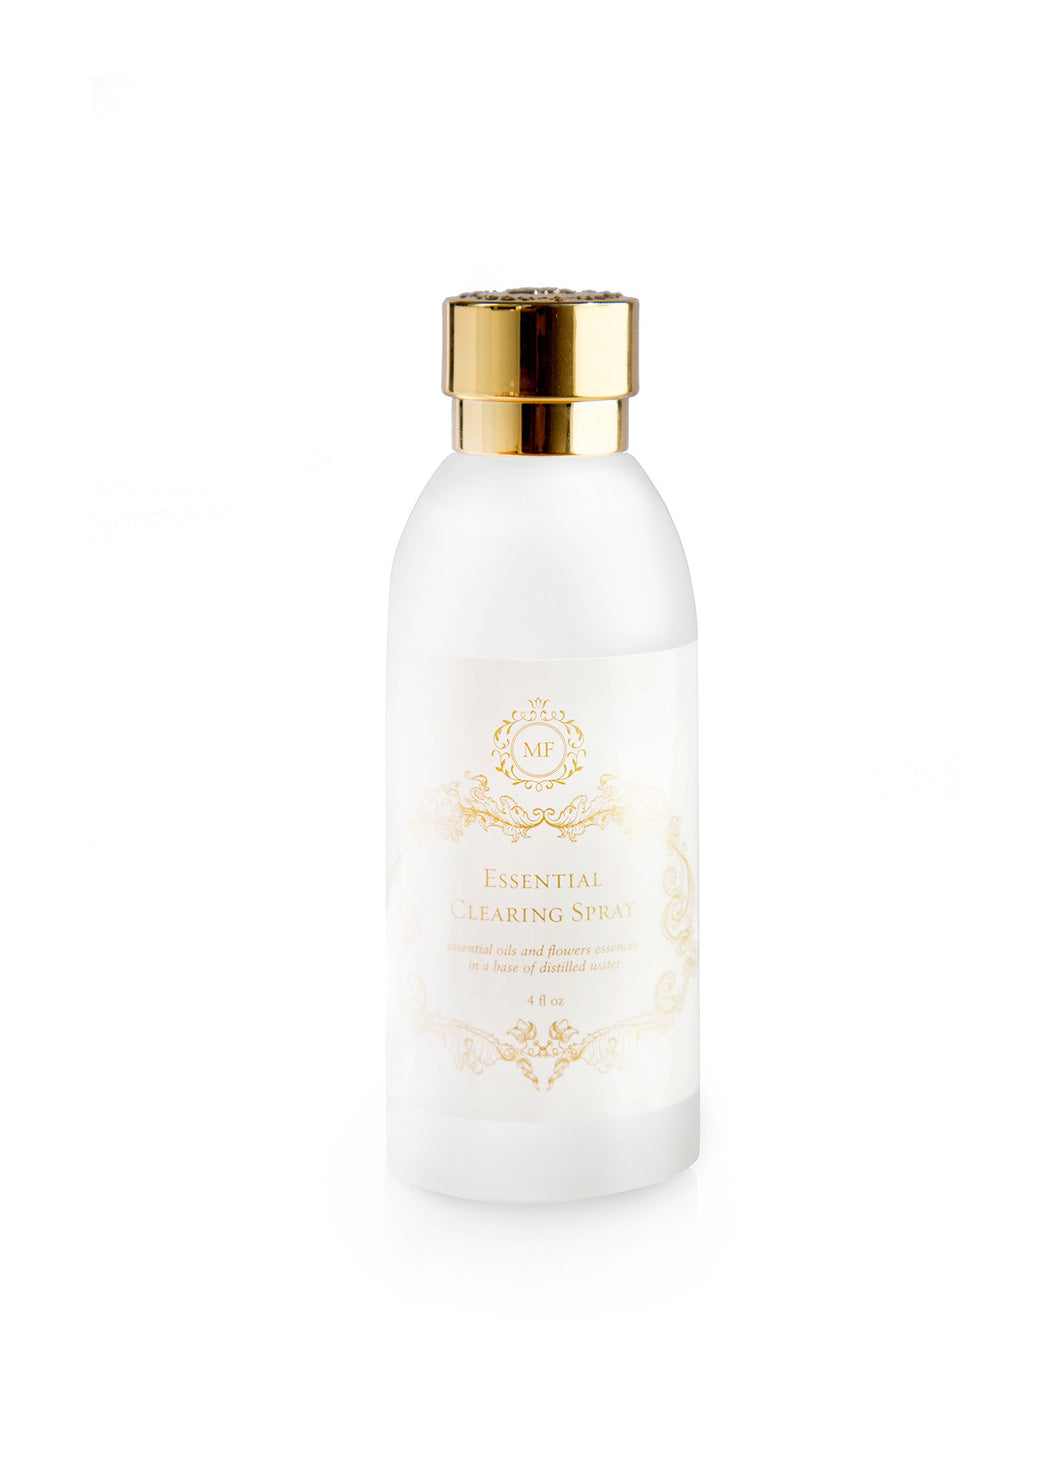 maison-fleurette-uplifiting-clearing-spray-lemon-aromatherapy-smudging-luxury-organics-frosted-glass-gold-bottle